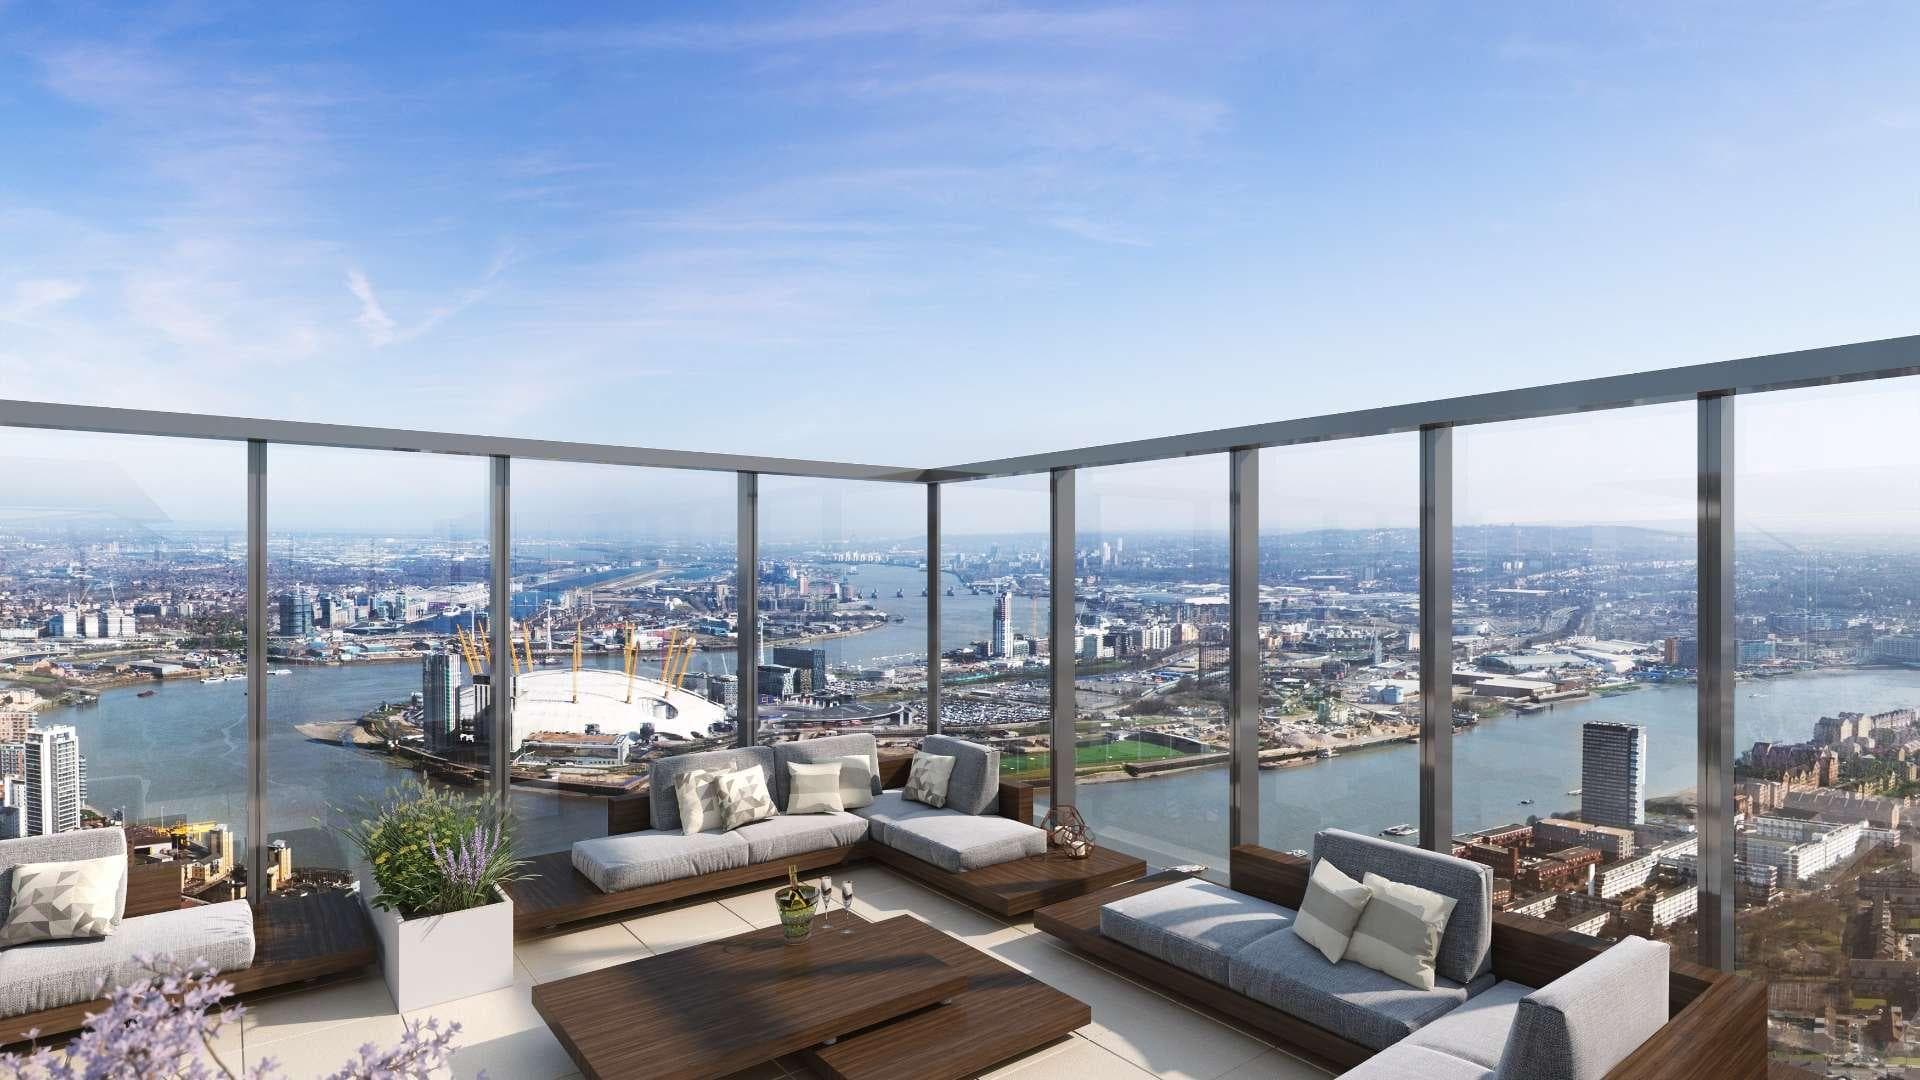 2 Bedroom Apartment For Sale Canary Wharf Lp17829 6cf468471073880.jpg